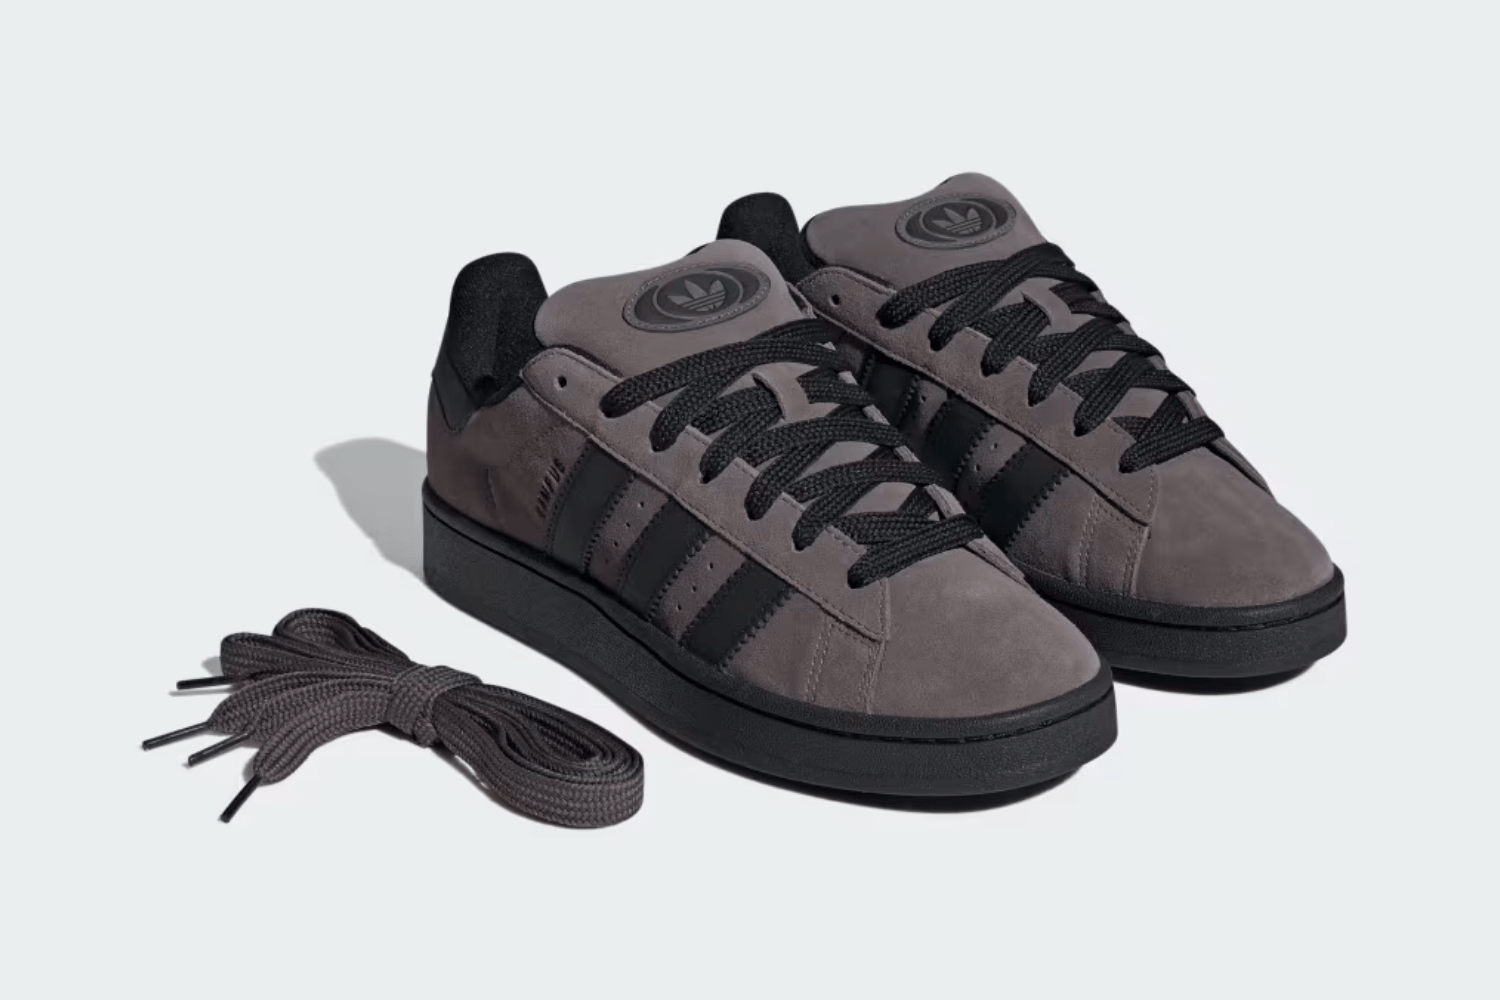 These Campus models are still in stock at adidas